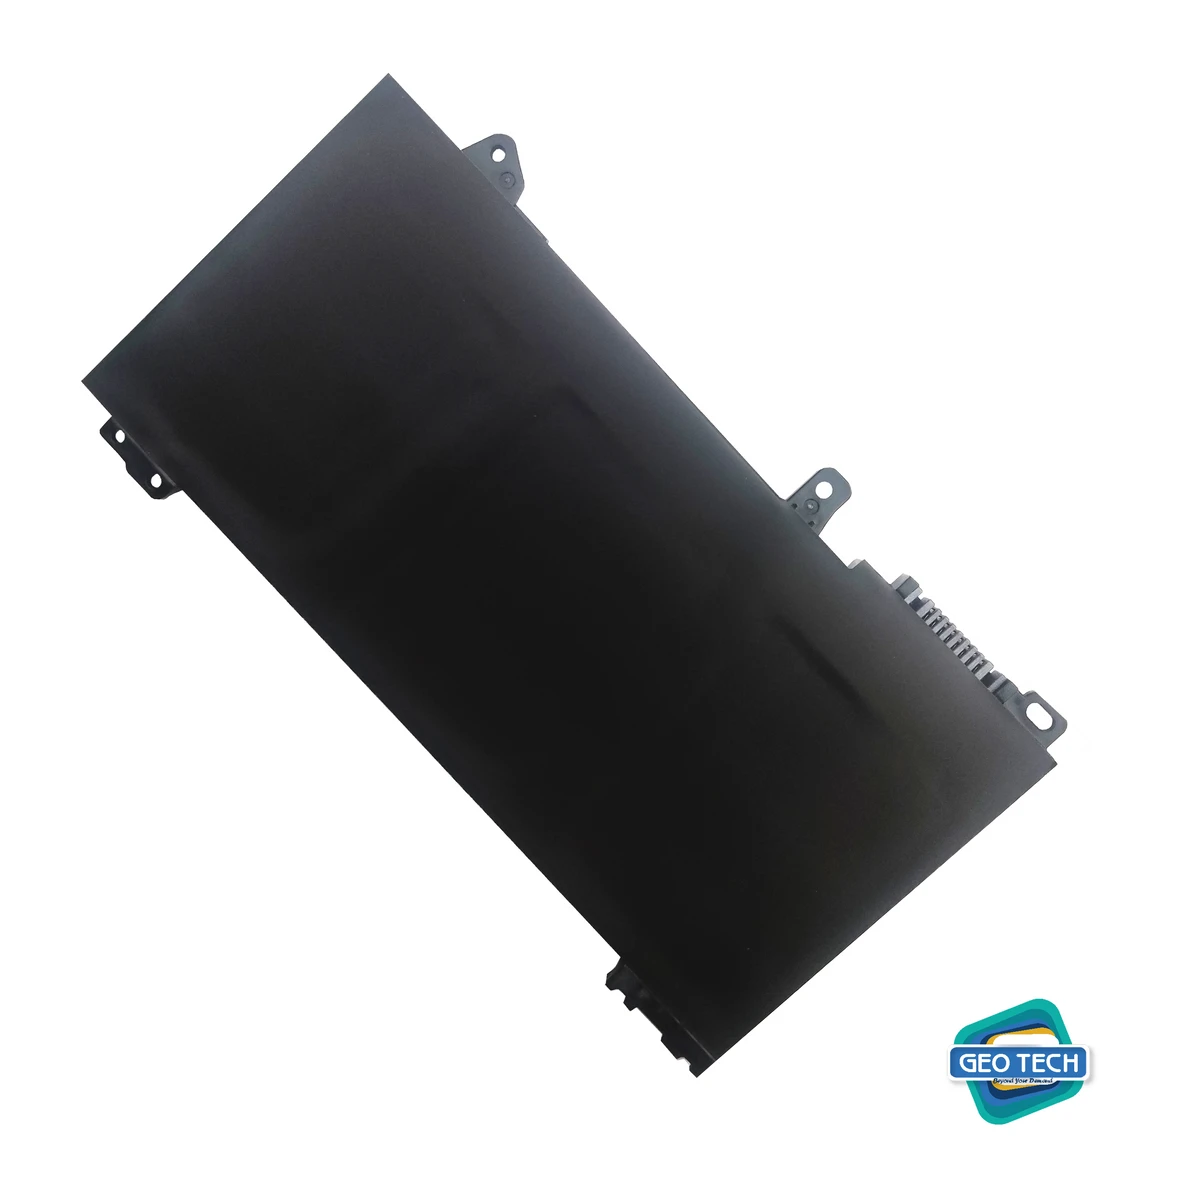 Laptop Battery For HP RE03XL Battery For HP ProBook 430 G6, 440 G6, 445 G6, 445R G6, 450 G6, 455 G6, 455R G6 Series GEO LIFE OEM QUALITY